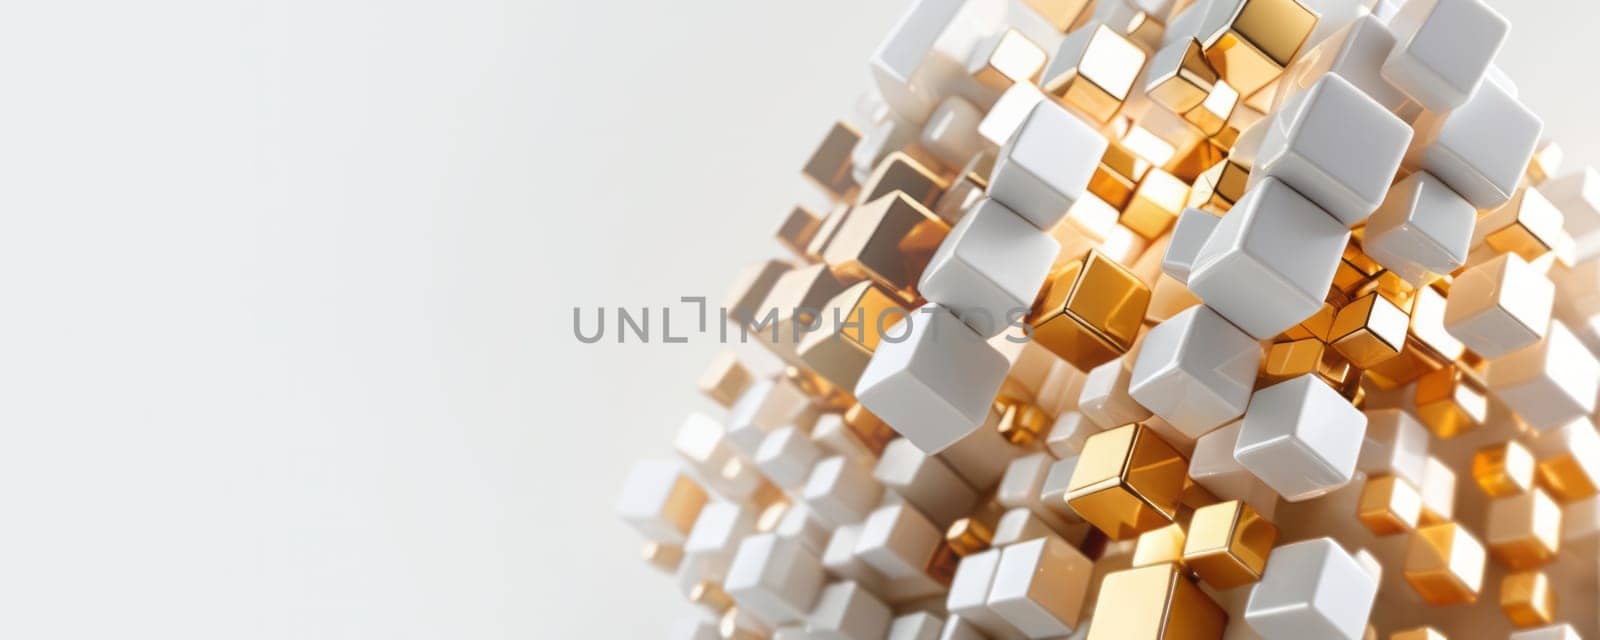 Golden and White Cubes in 3D Structure by nkotlyar